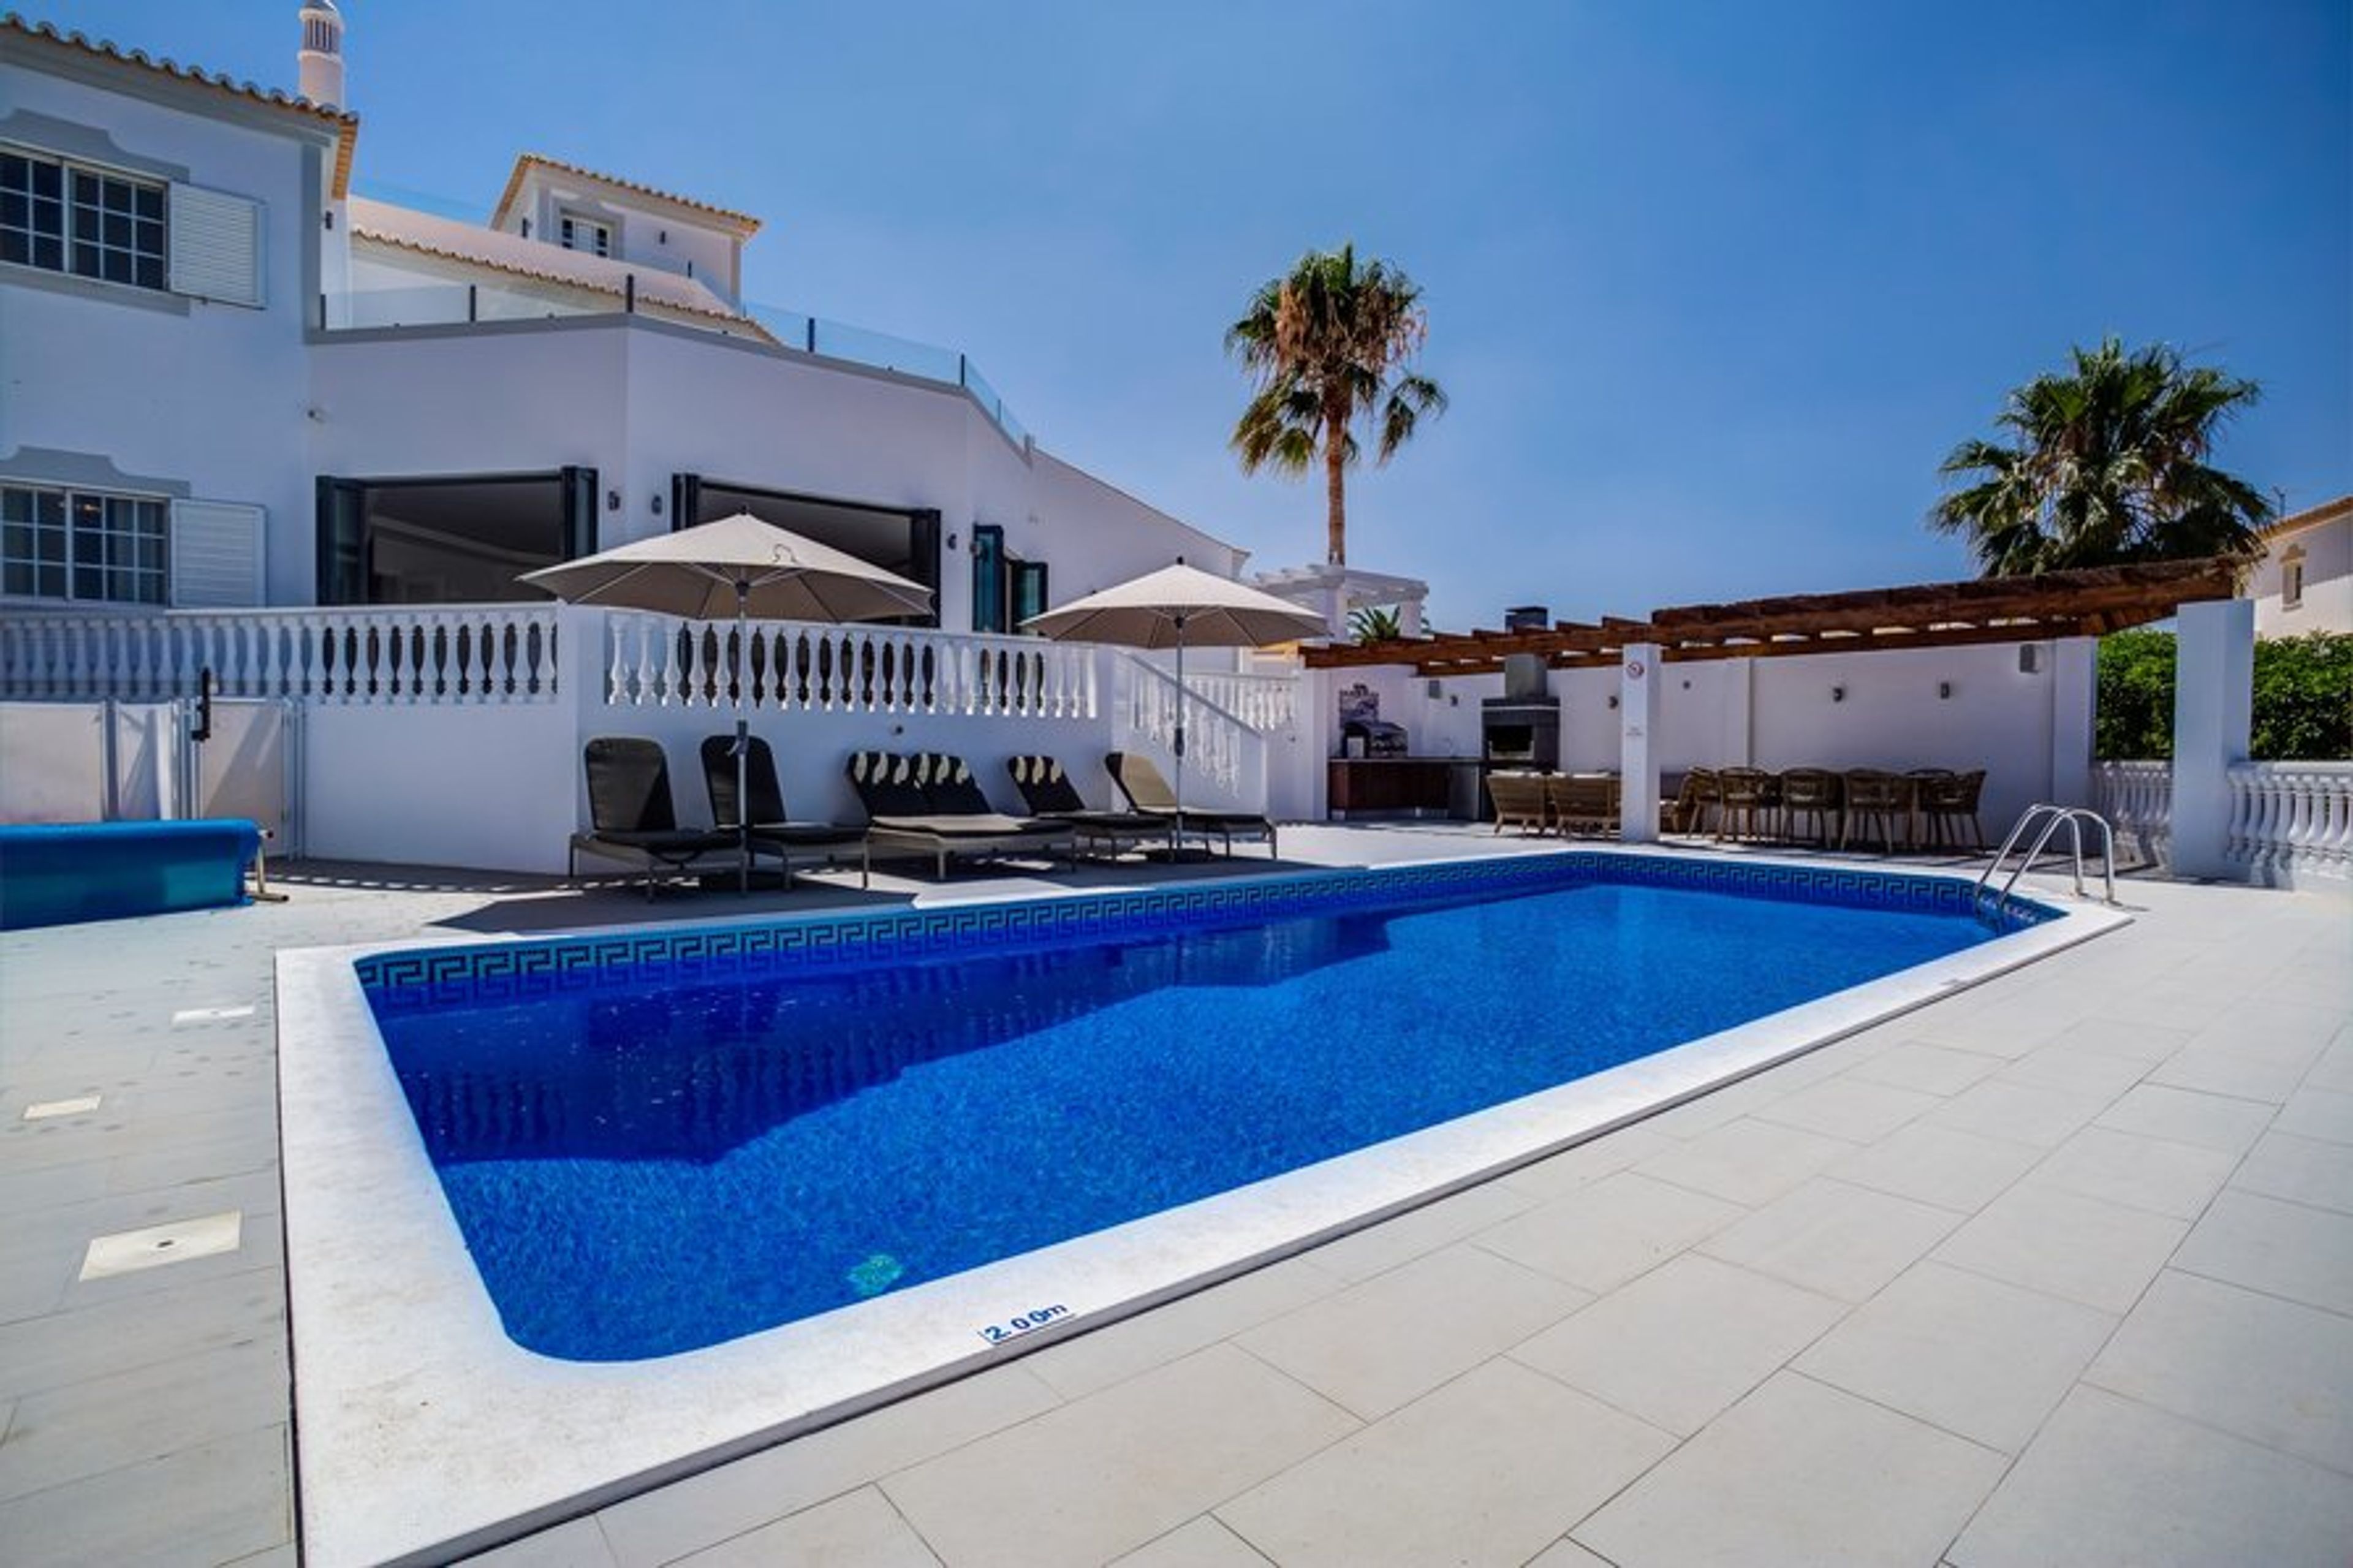 4 bedroomed Algarve villa with sea views, pool and BBQ area